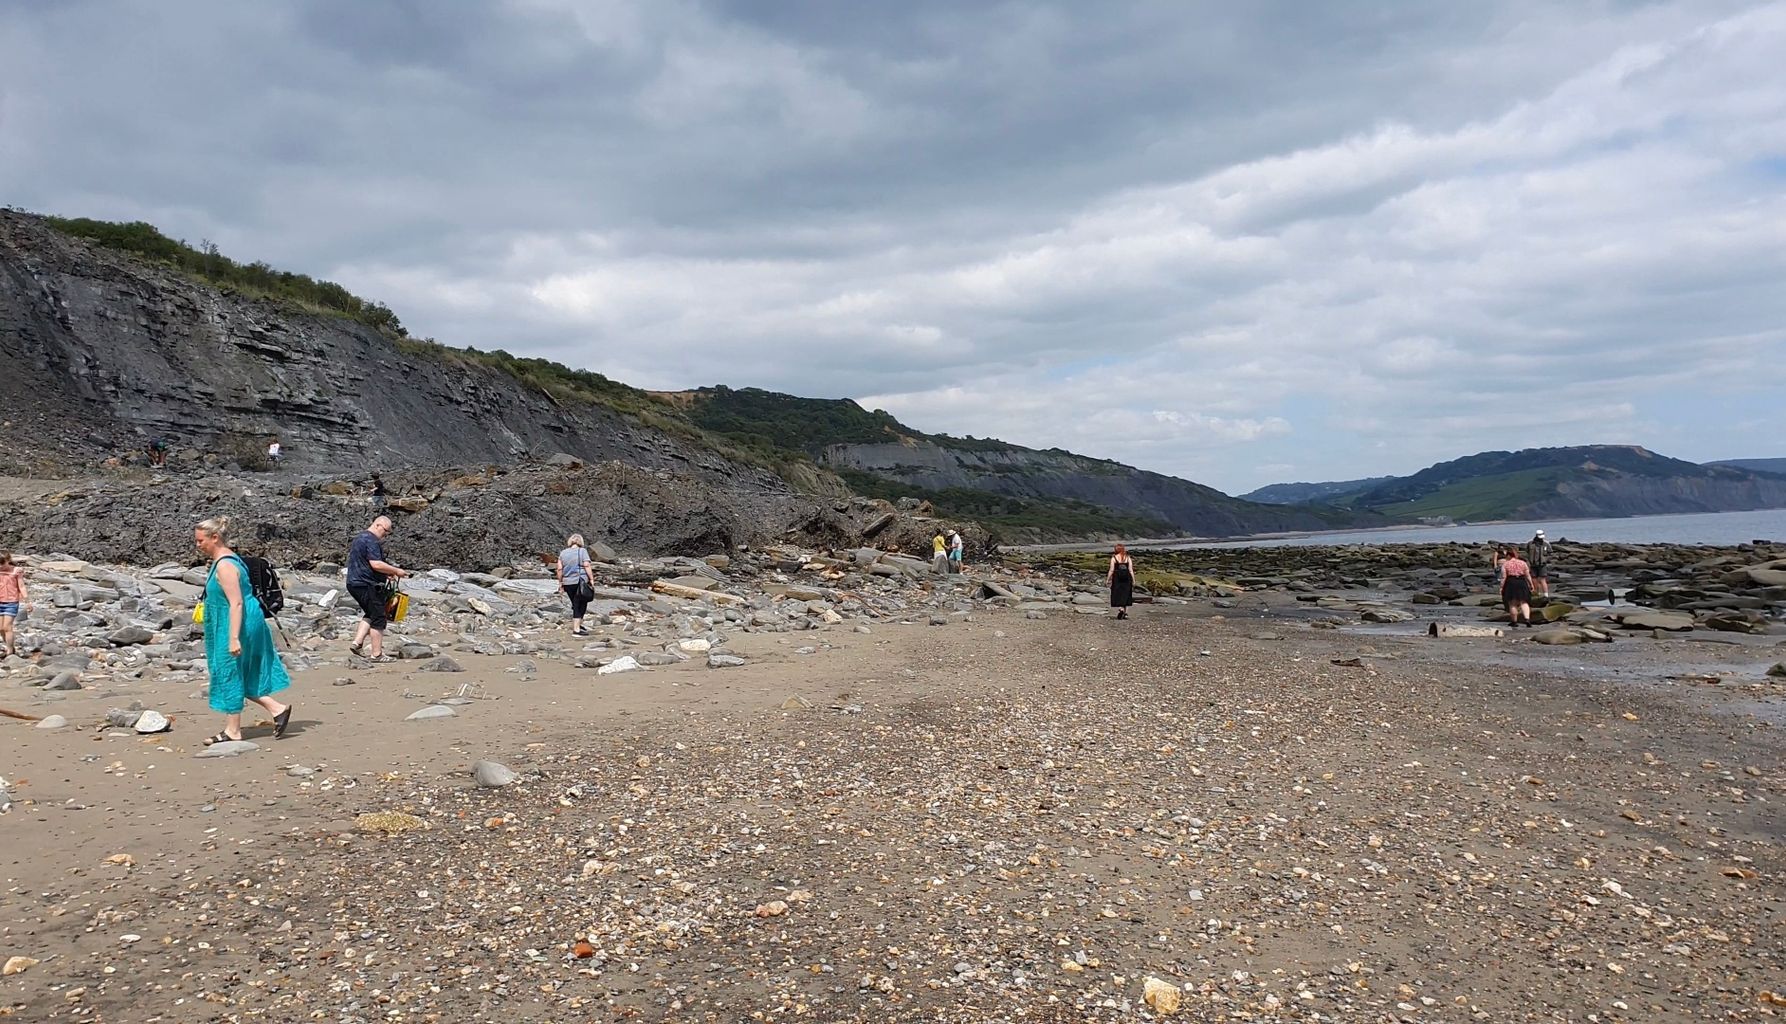 Material from disused landfill site falling onto Dorset beach during landslips